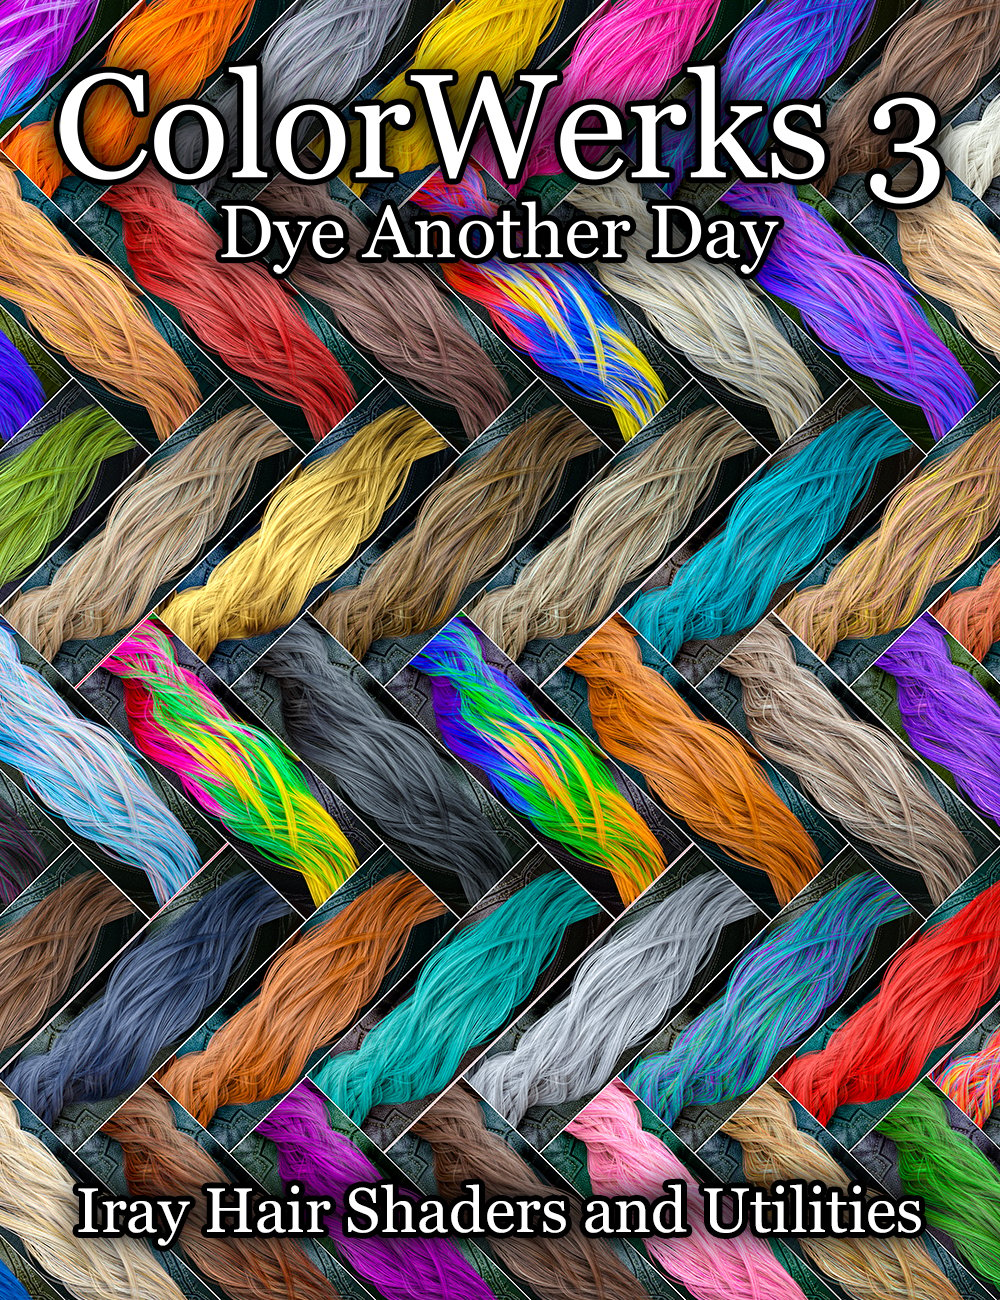 ColorWerks 3: Dye Another Day Iray Hair Shaders by: SloshWerks, 3D Models by Daz 3D